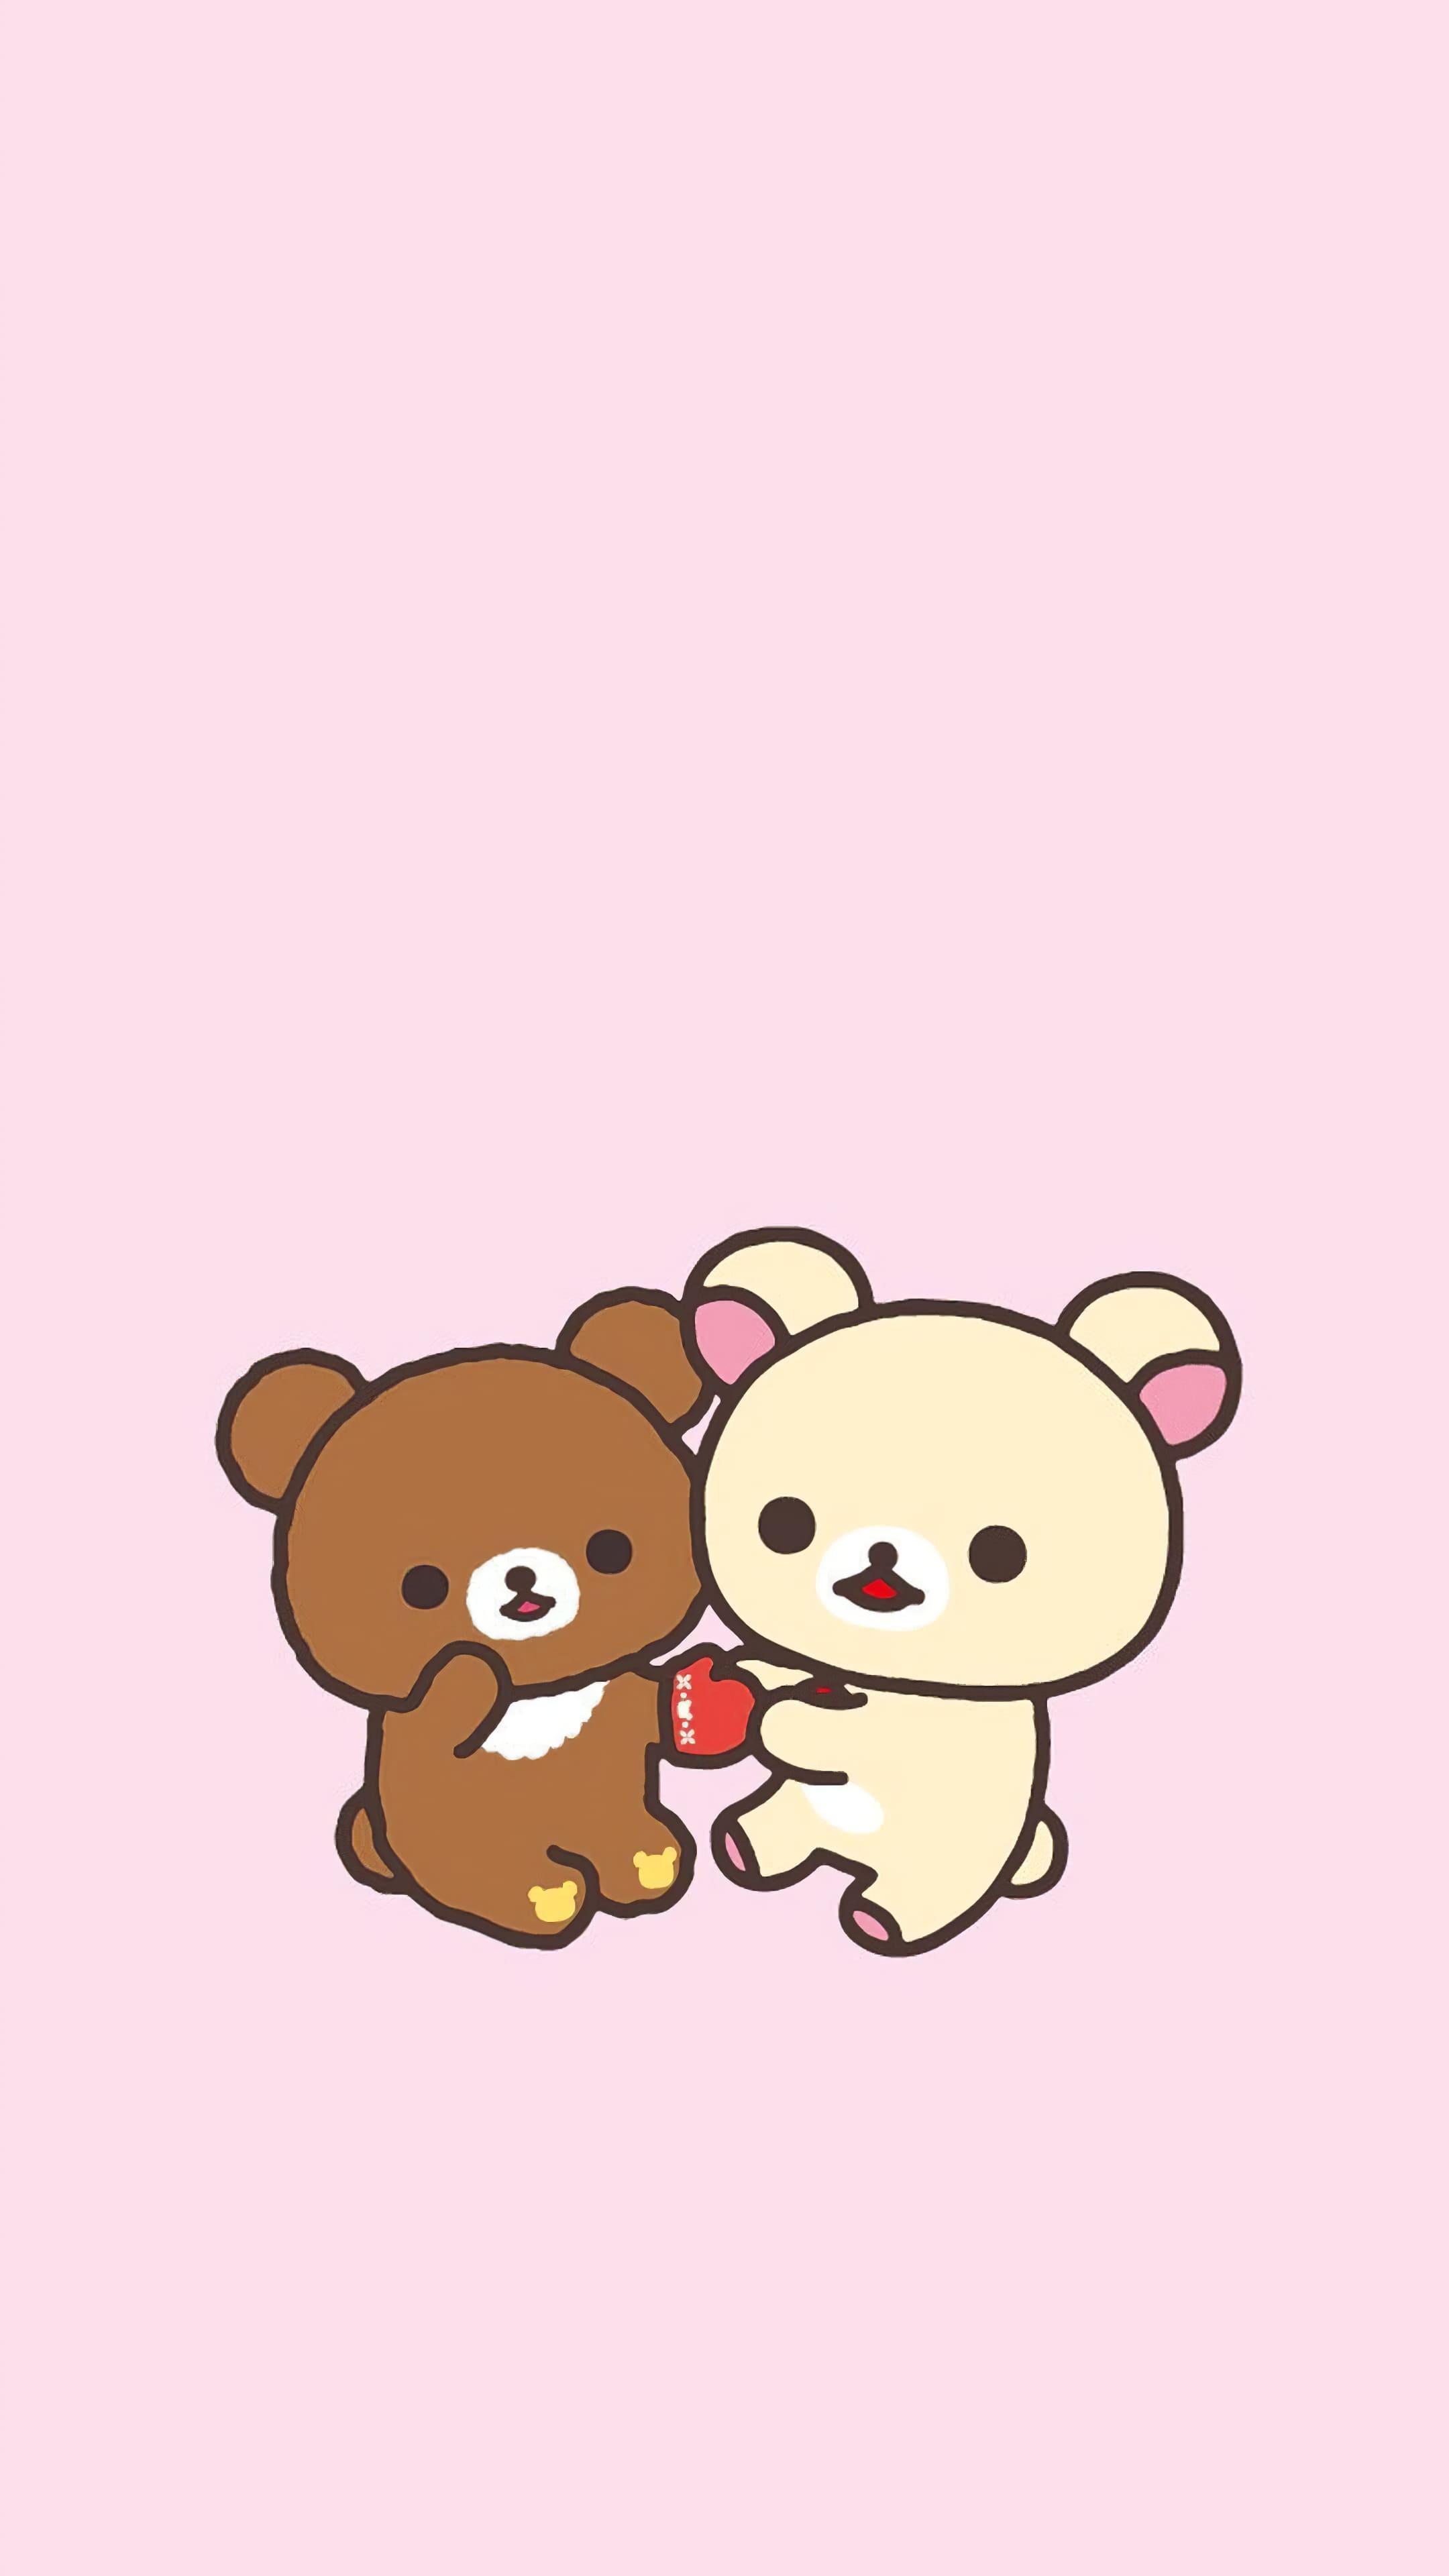 Rilakkuma iPhone wallpaper! You can download it from the link in my profile. - Kawaii